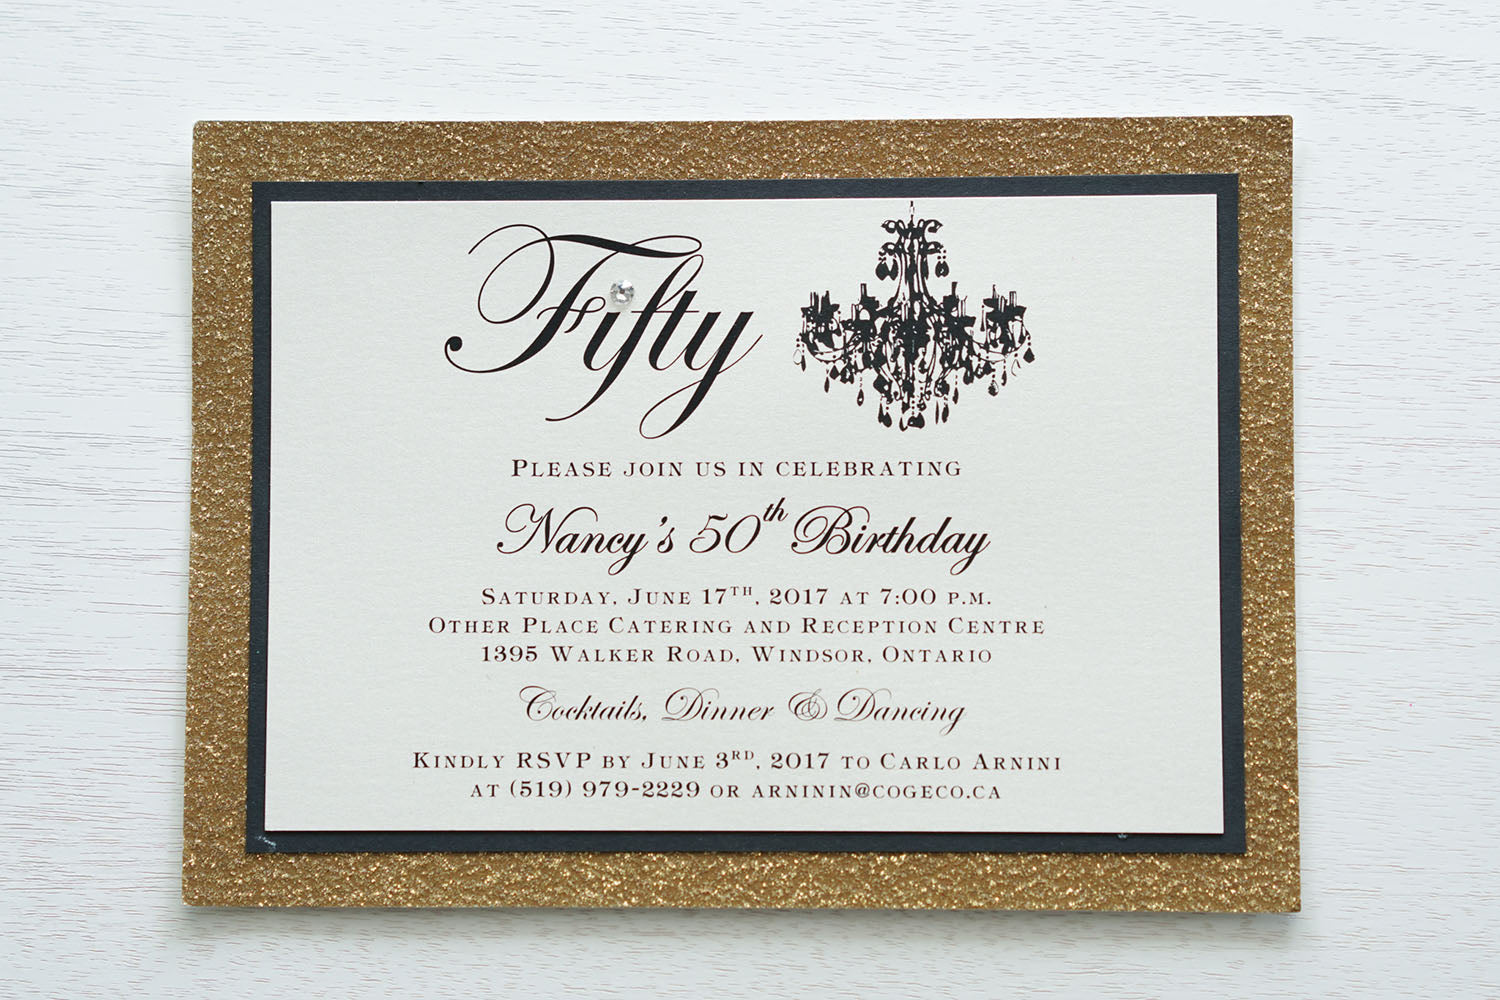 alt="Elegant birthday invitation features an ivory pearlescent shimmer card stock on matte black and gold glitter card stock, a beautiful chandelier image, fifty written in script and is finished with a jewel detail"